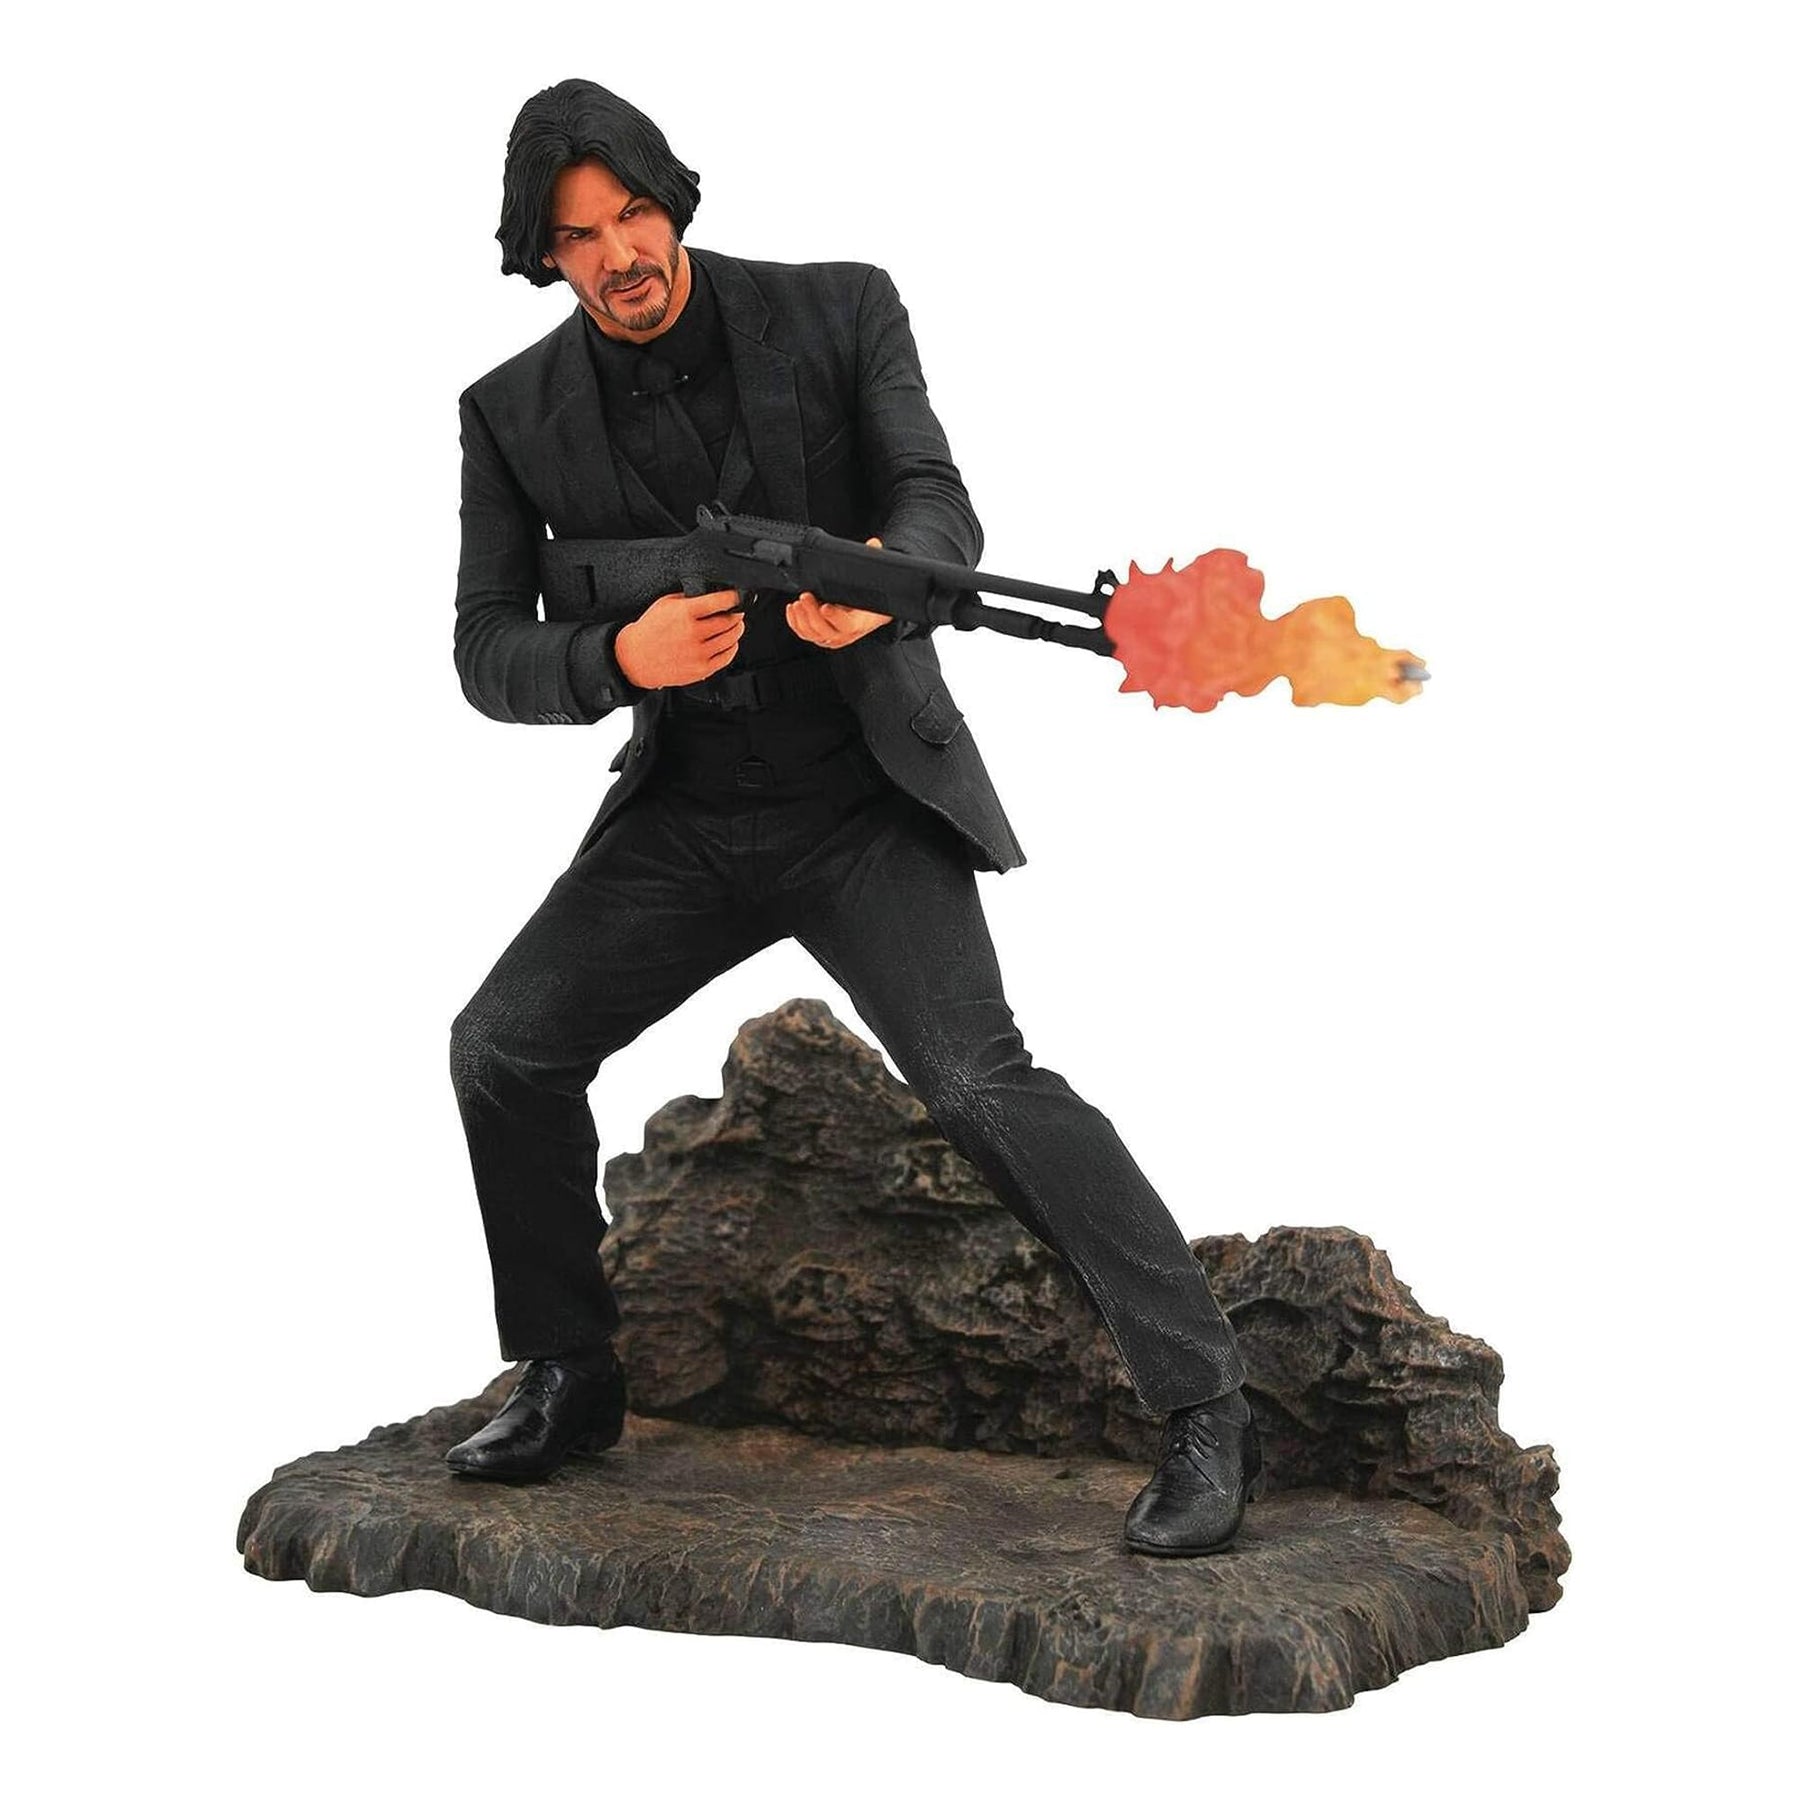 John Wick Gallery Catacombs 9 Inch PVC Statue